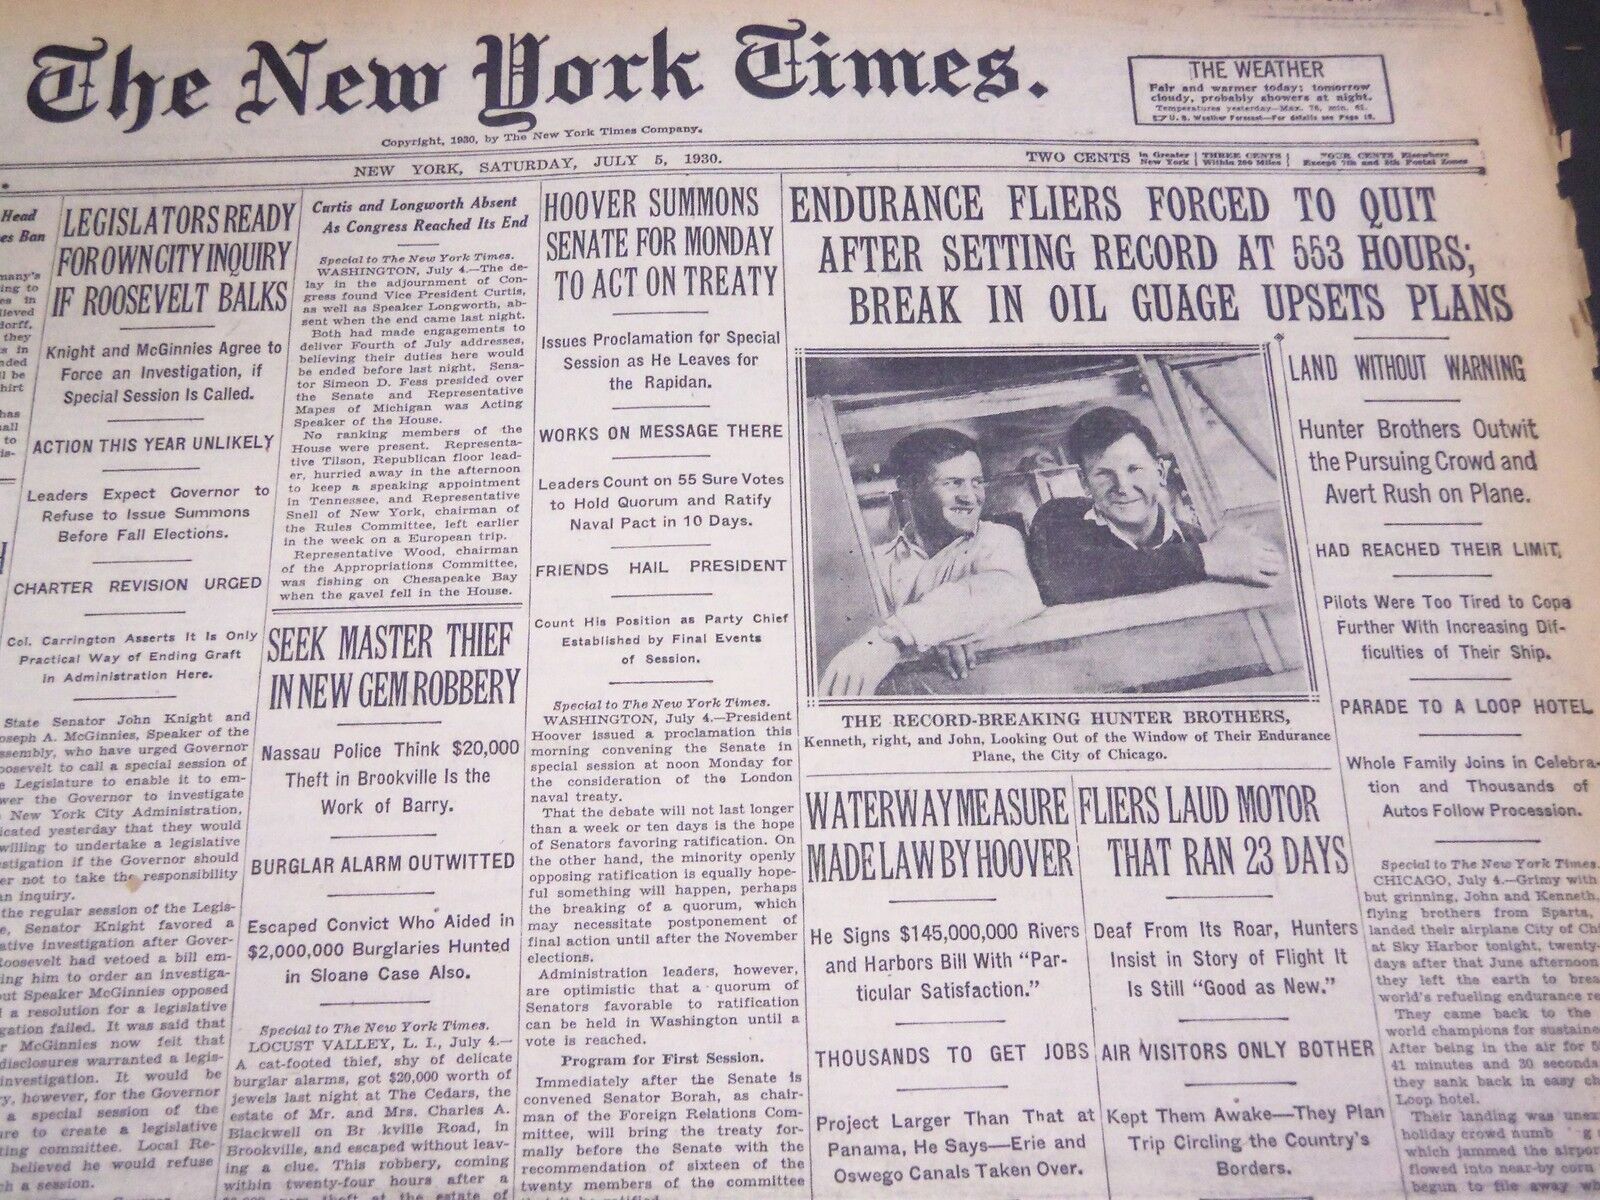 1930 JULY 5 NEW YORK TIMES - ENDURANCE FLIERS FORCED TO QUIT - NT 4960